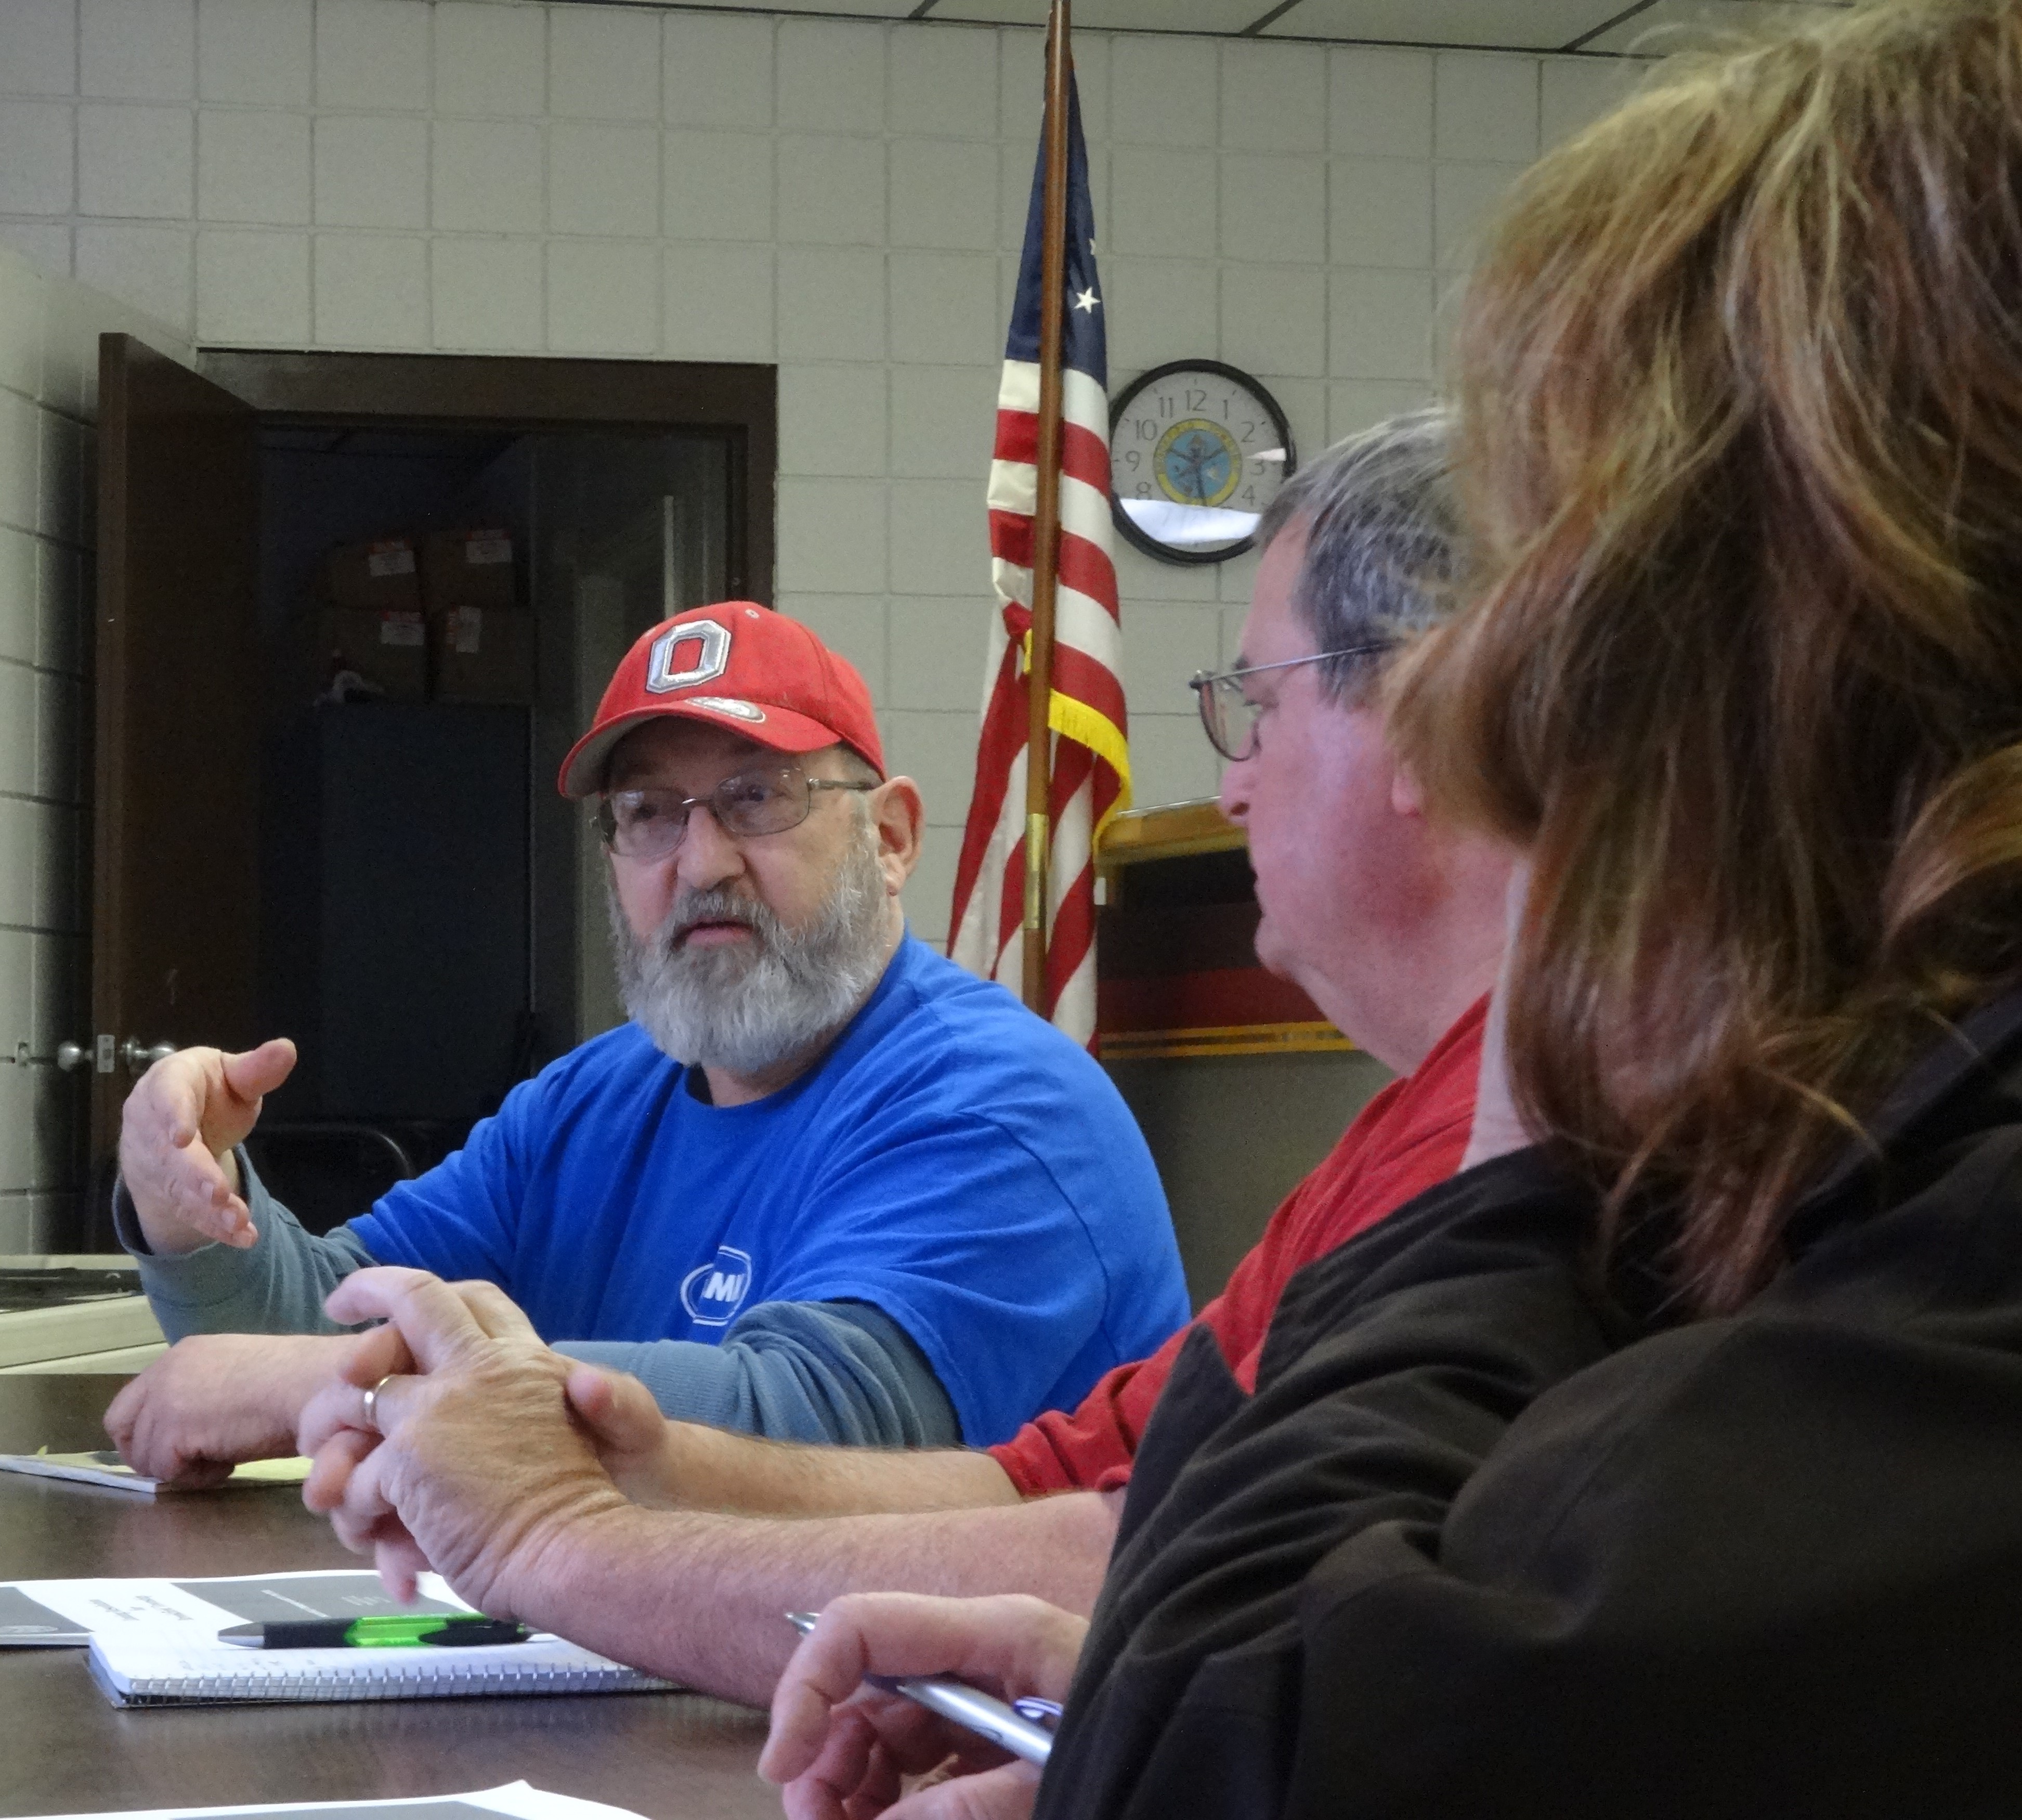 Brookfield Township Zoning Commission Chairman Todd Fencyk makes a point as Chuck Fizet and Noelle Honel look on.